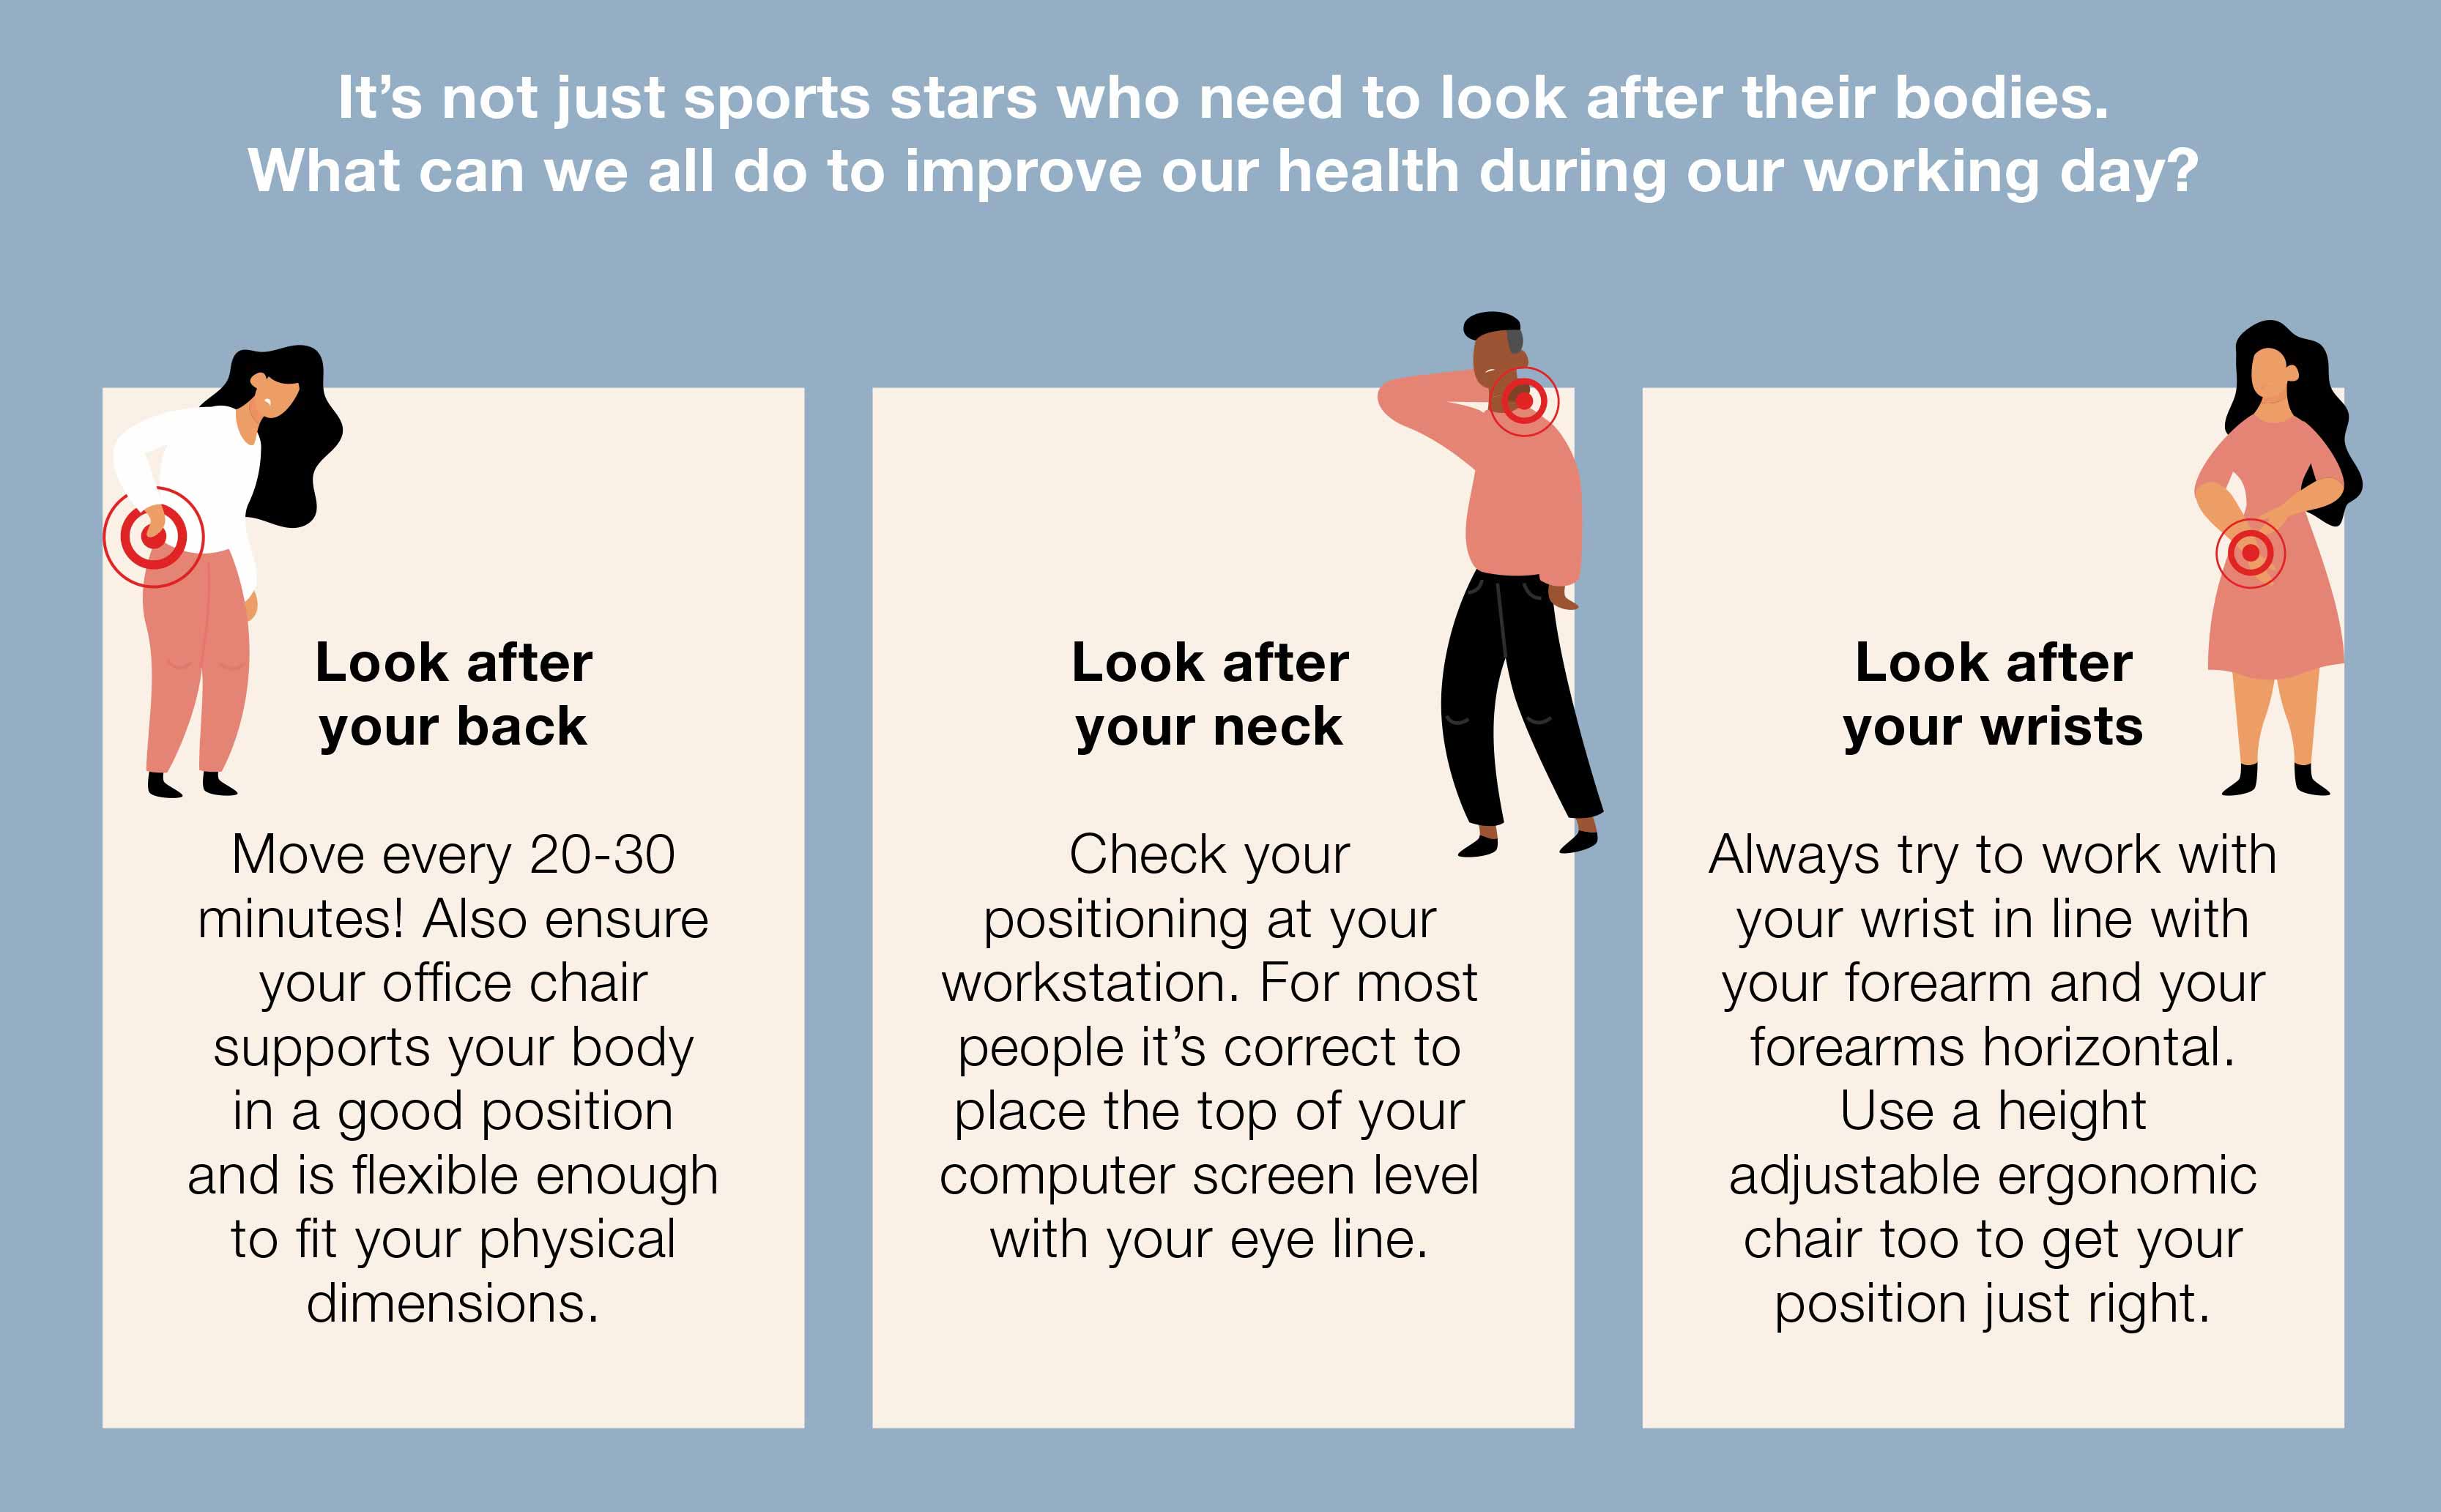 How to look after your back, neck and wrists at work